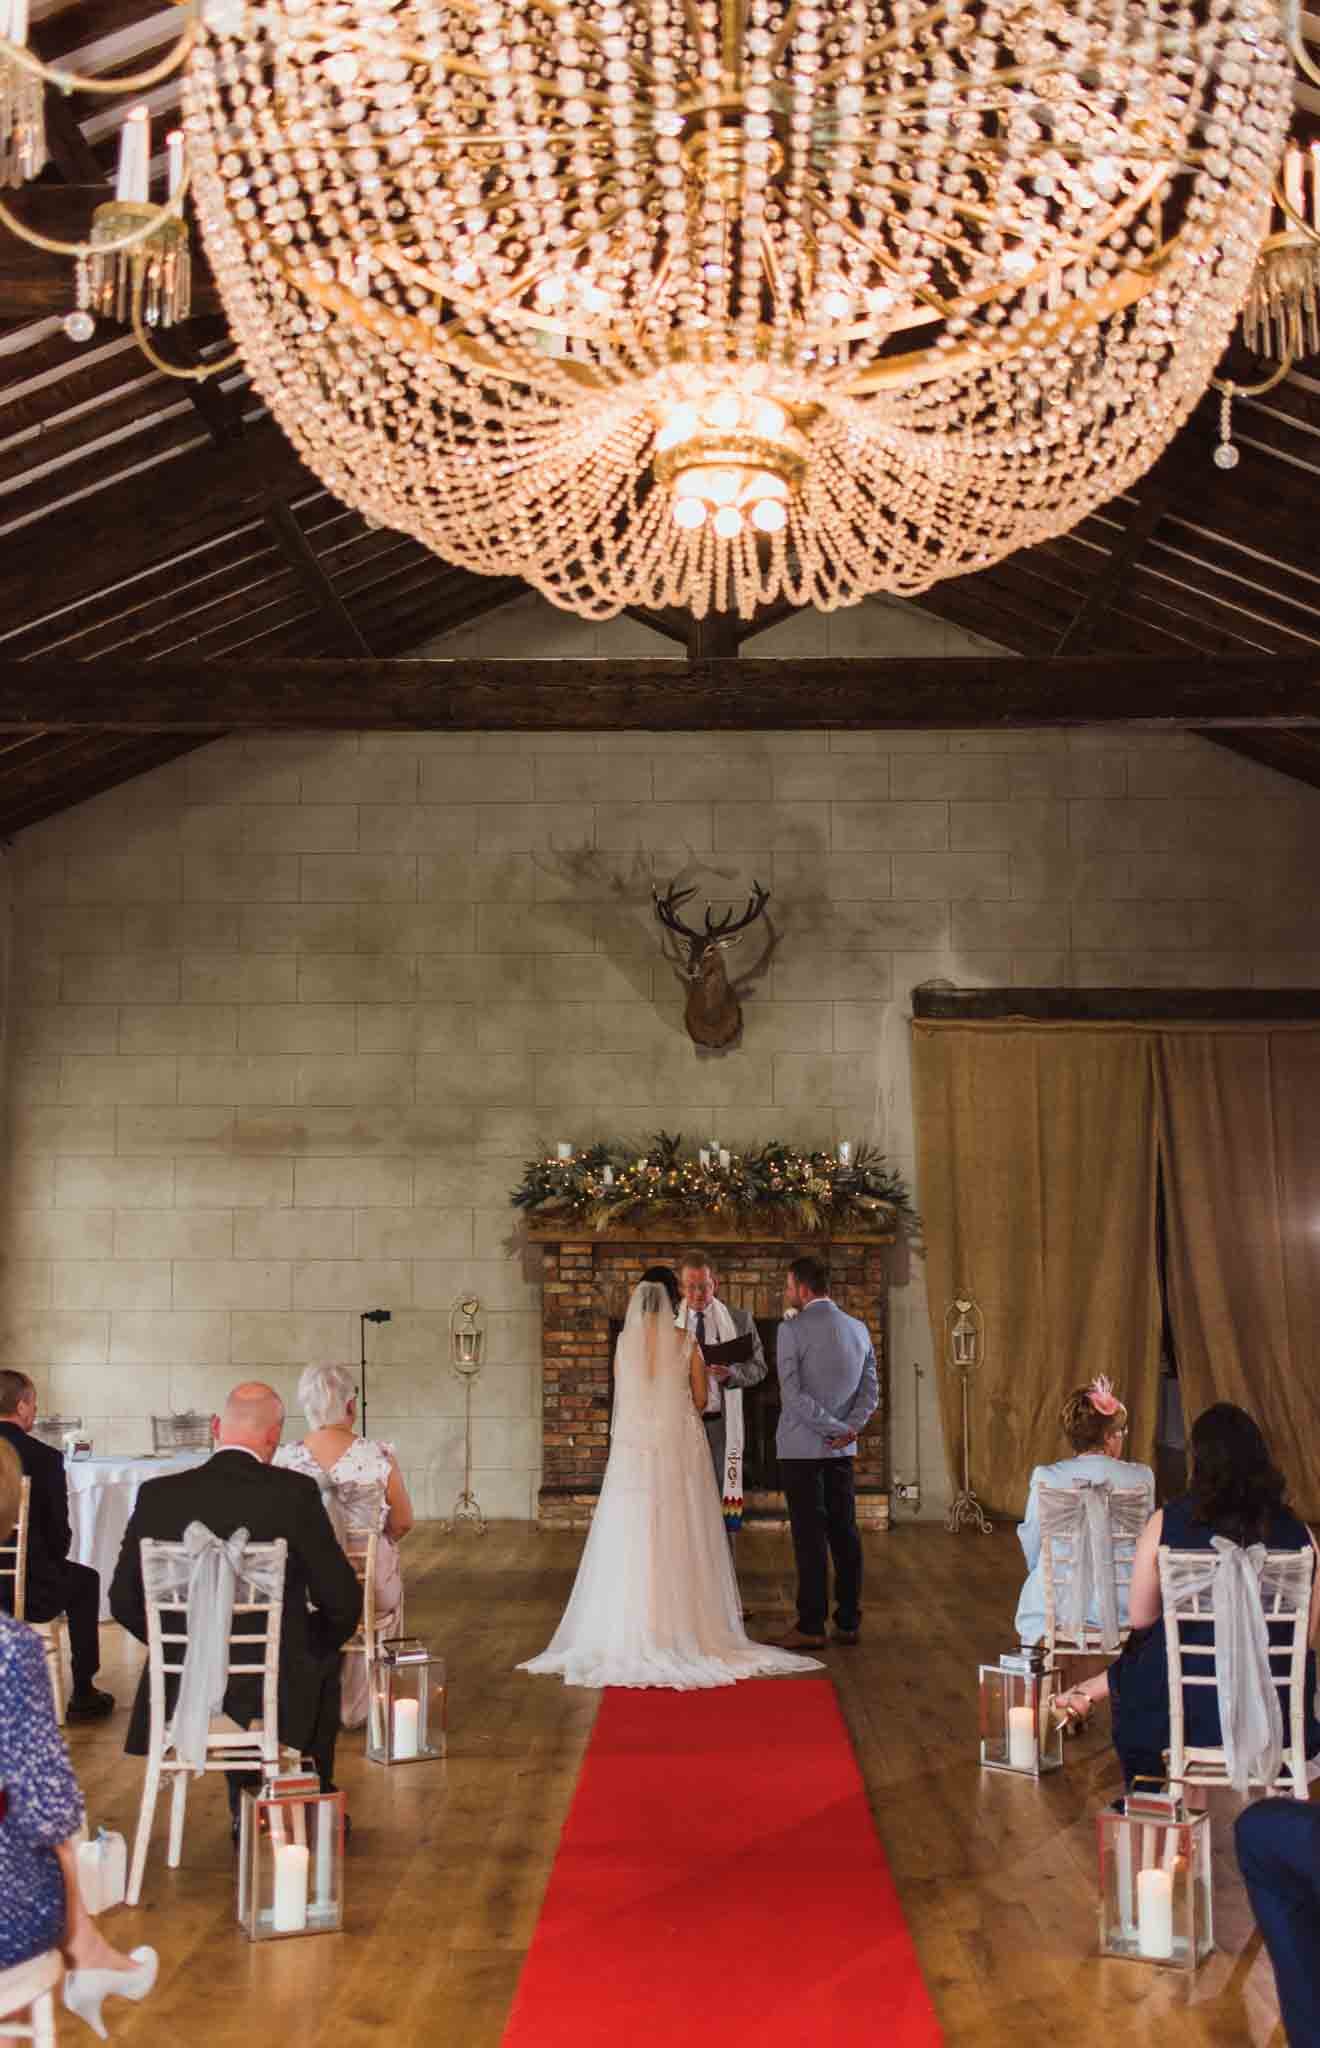  Bride and groom at end of red carpet under the large chandelier in a ceremony in this Lurga in this venue. 